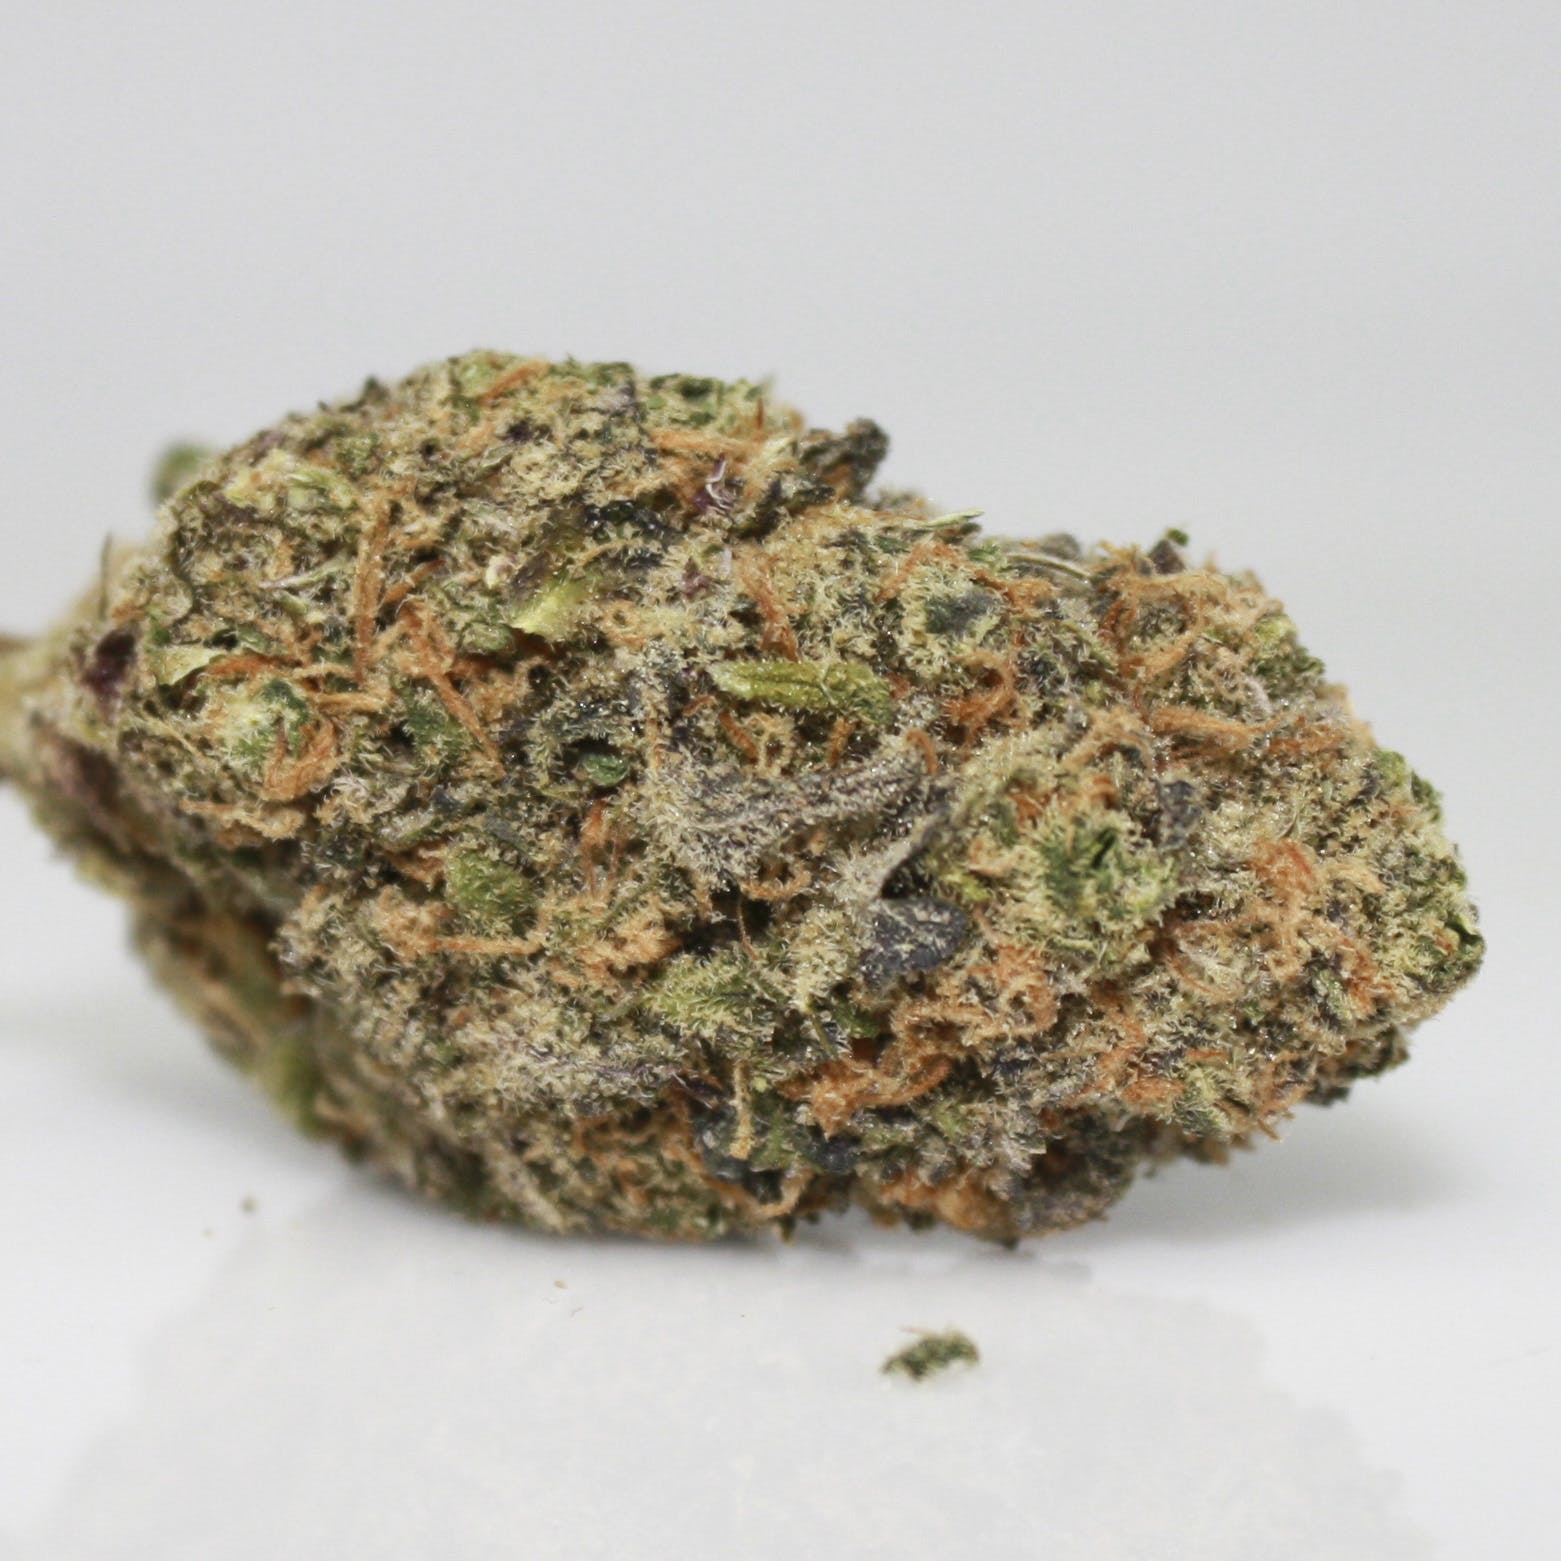 indica-dr-who-rogue-river-botanicals-15-49-25-thc